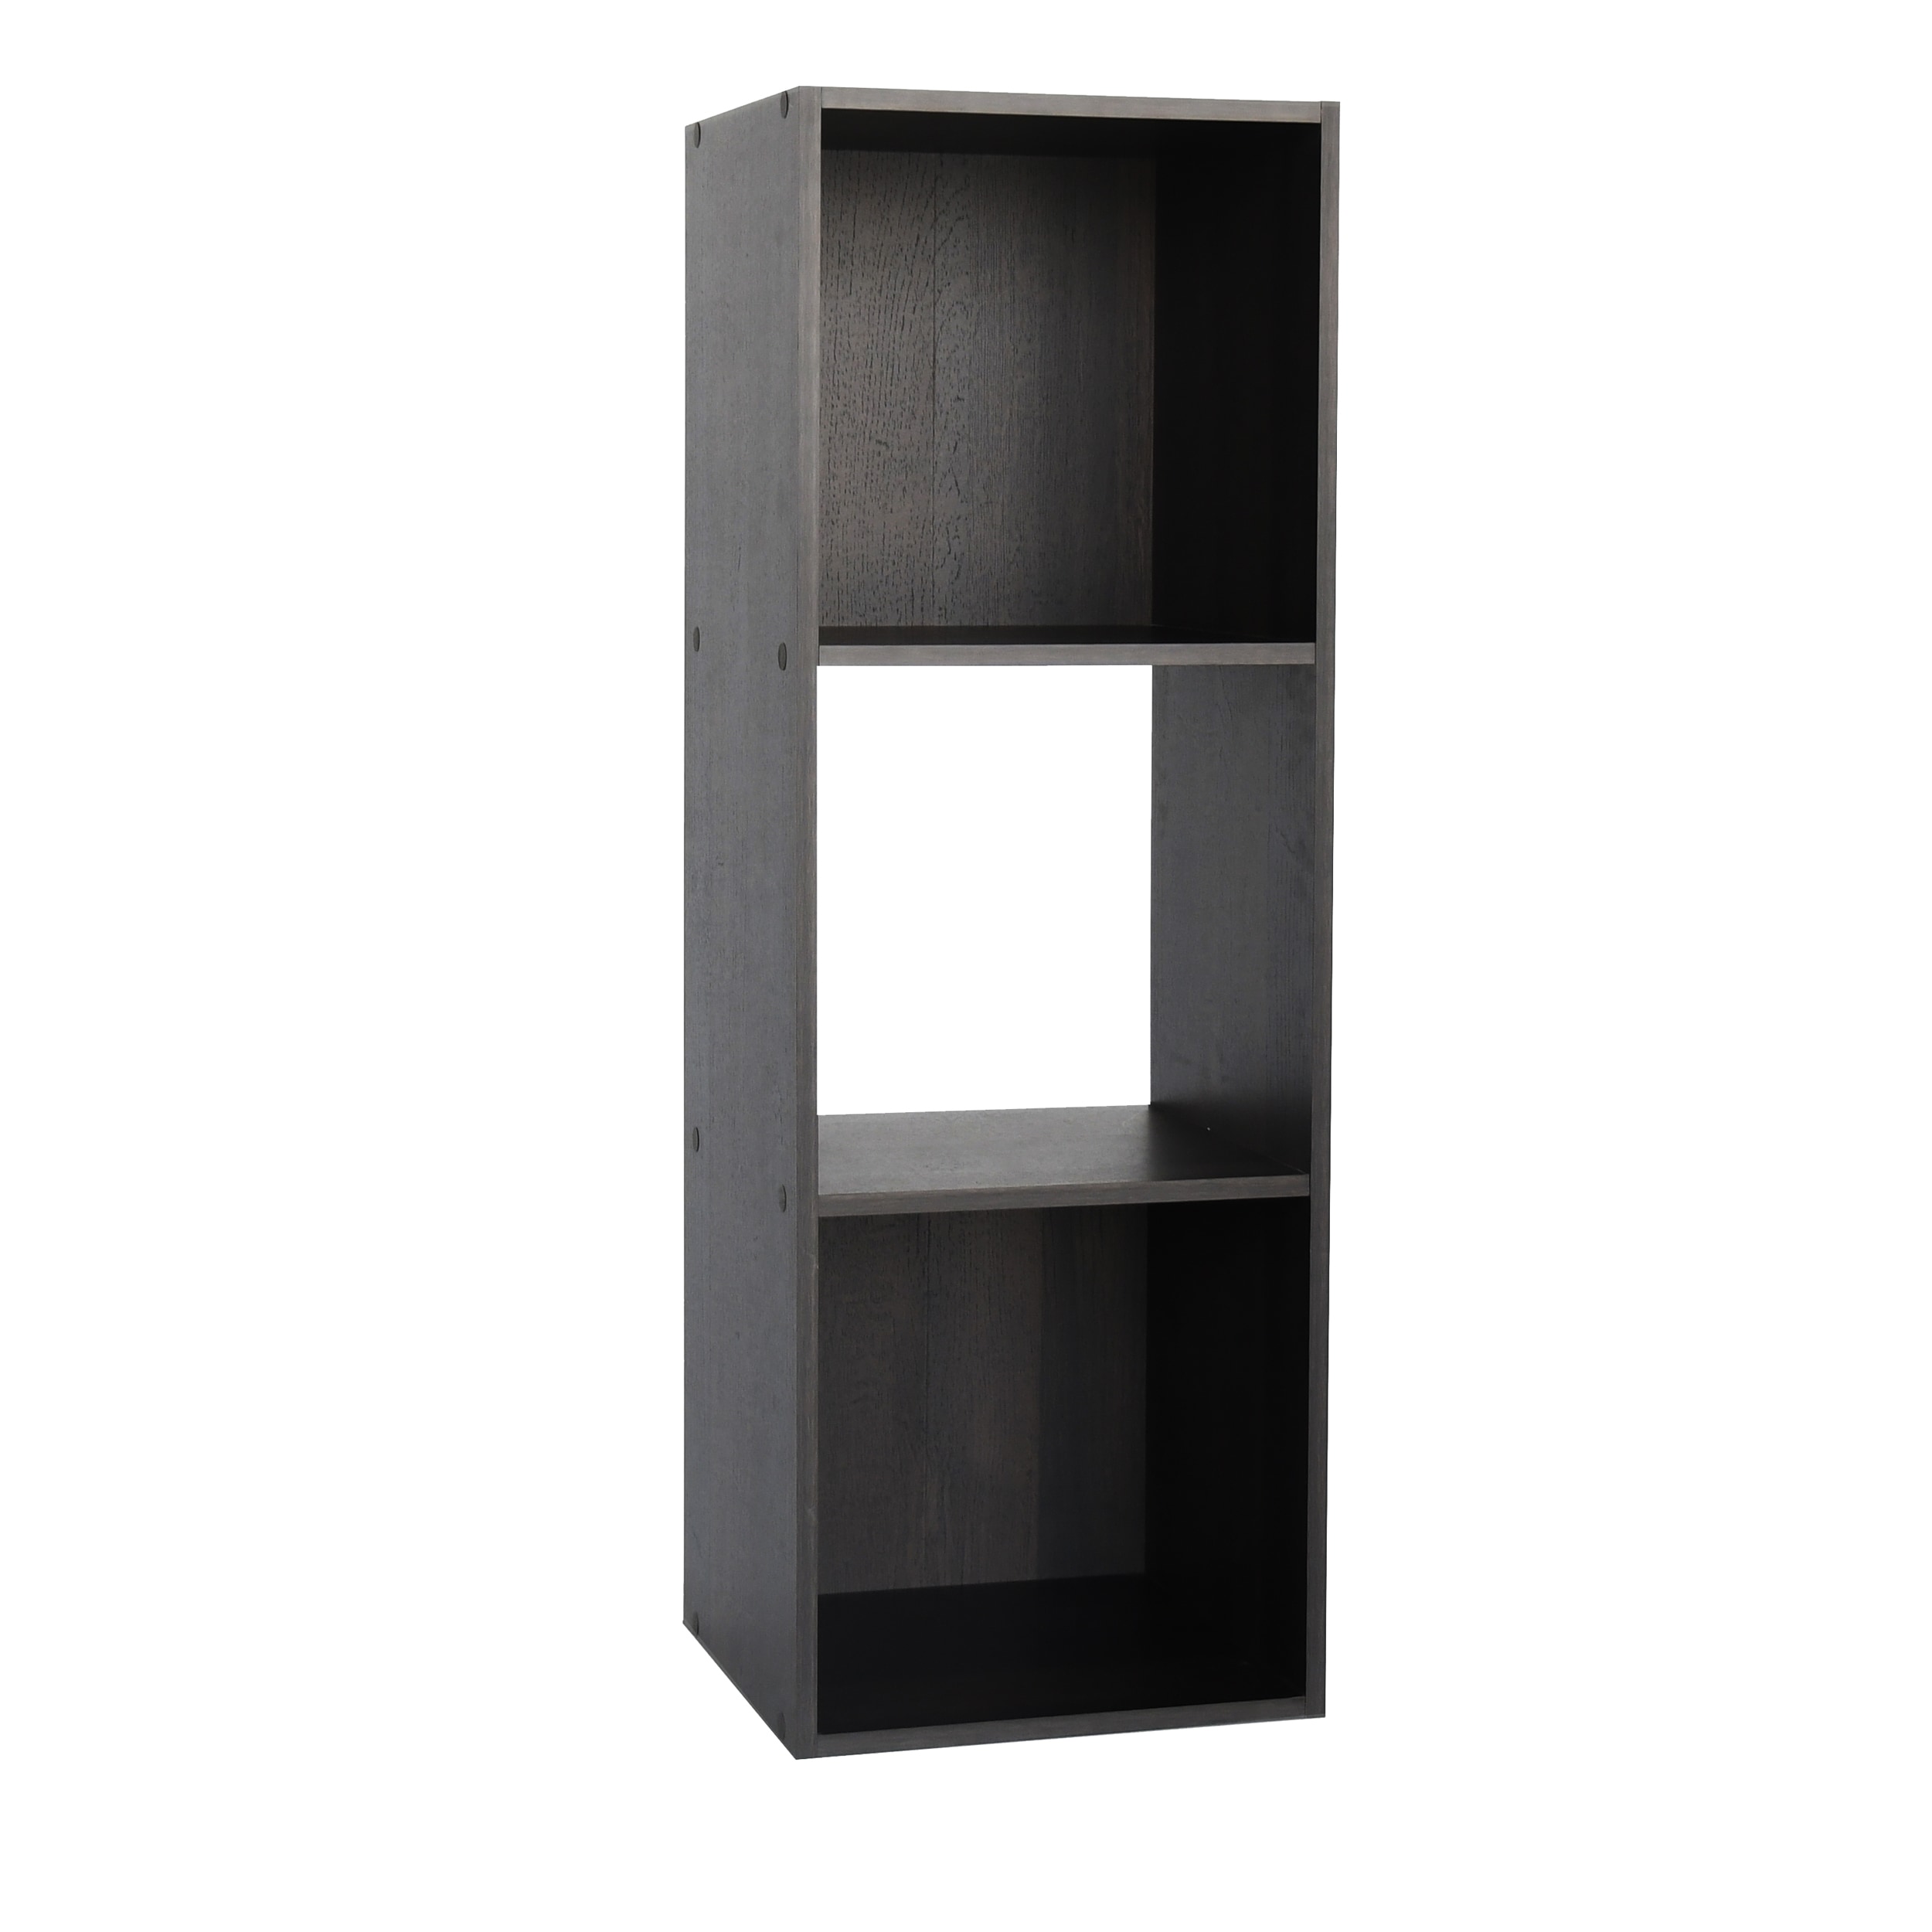 Best Choice Products 9-Cube Storage Organizer, 11in Shelf Opening,  Bookcase, Display Shelf, Customizable w/ 3 Removable Back Panels - Black